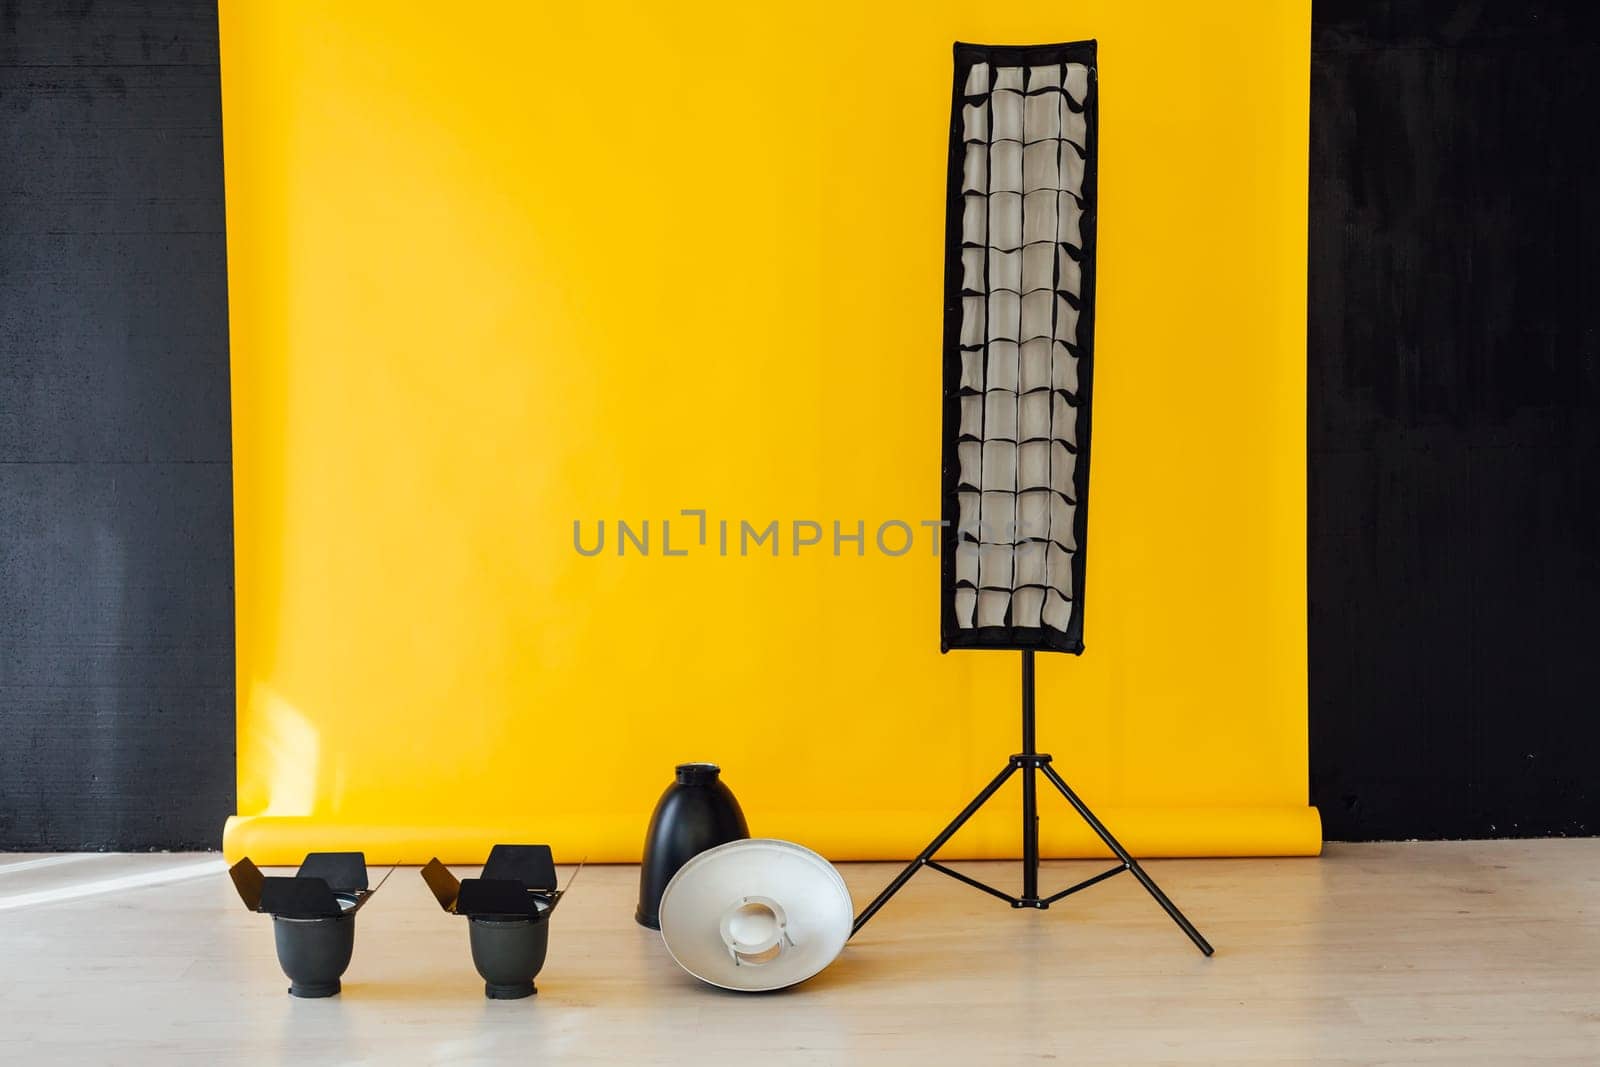 Flash equipment photo studio accessories on yellow with black background